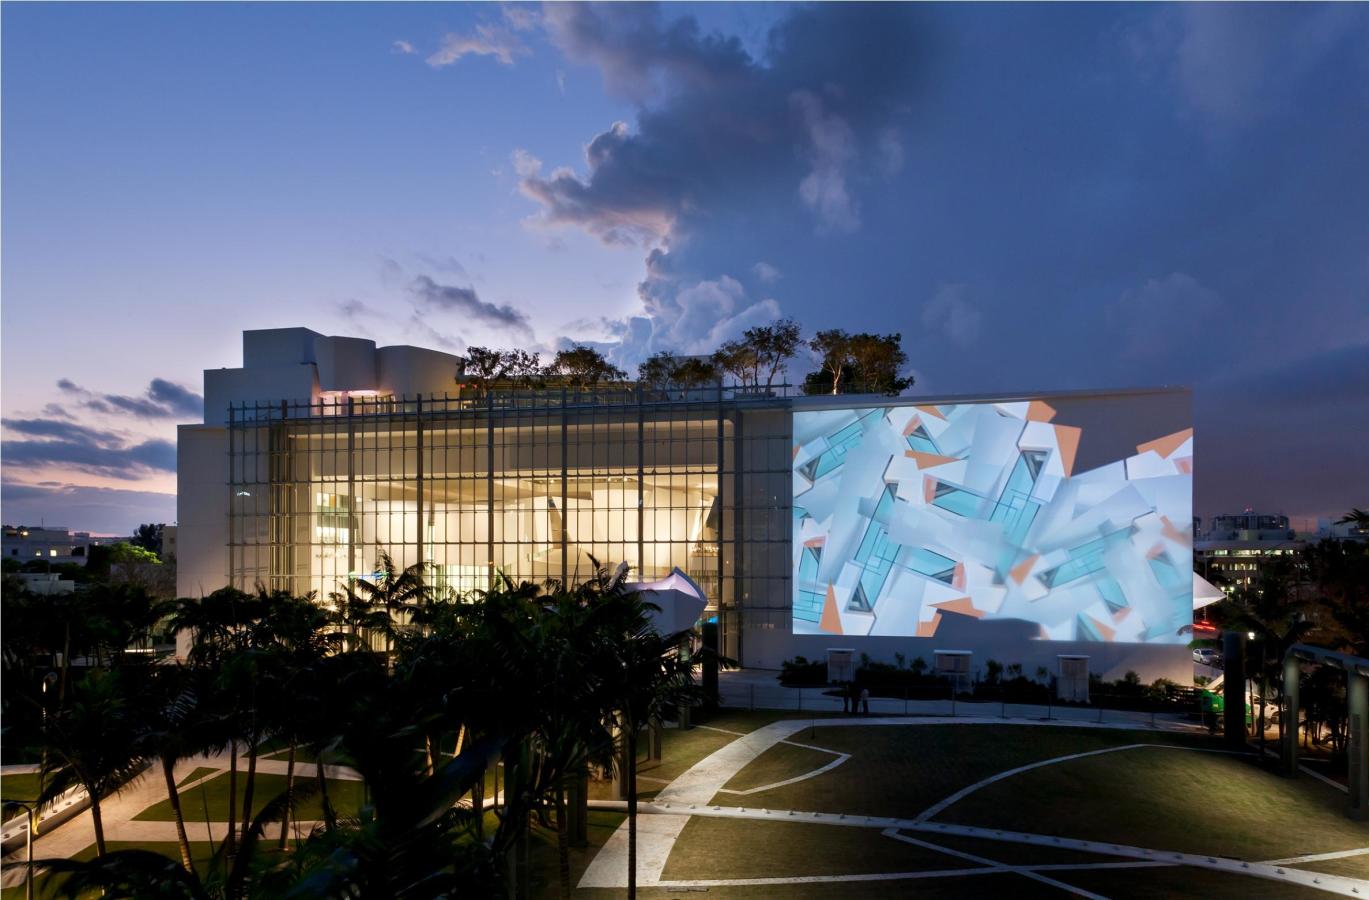 New World Center and video mural "Chronograph" - photo by Claudia Uribe